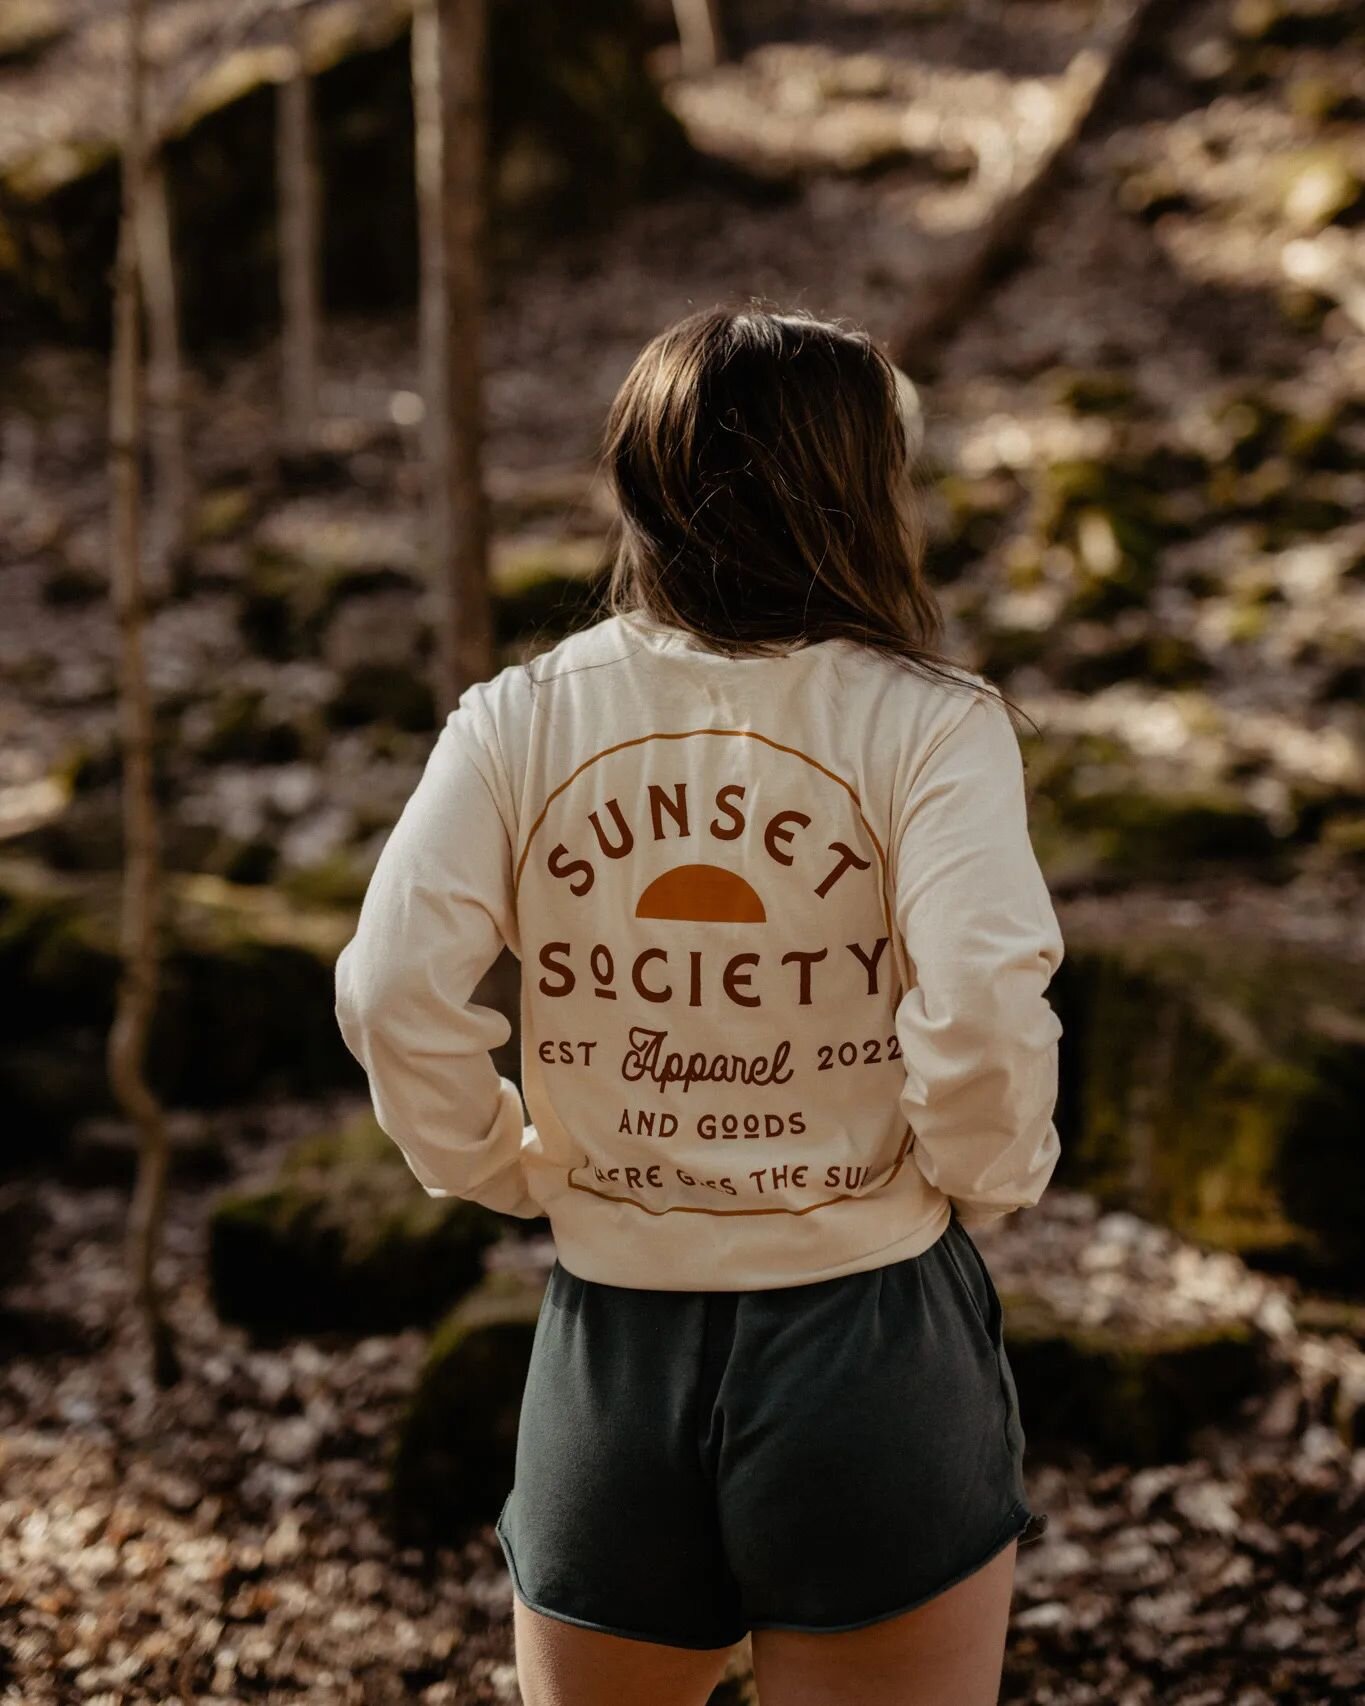 IT'S HERE! 🌅 Shop sunset society through the link in bio 😍 limited quanities, get them while they're hot 🤙

#sunsetsociety #outdoorsygals #outdoorsy #granolagirl #campbrandgoods #clothingbrand